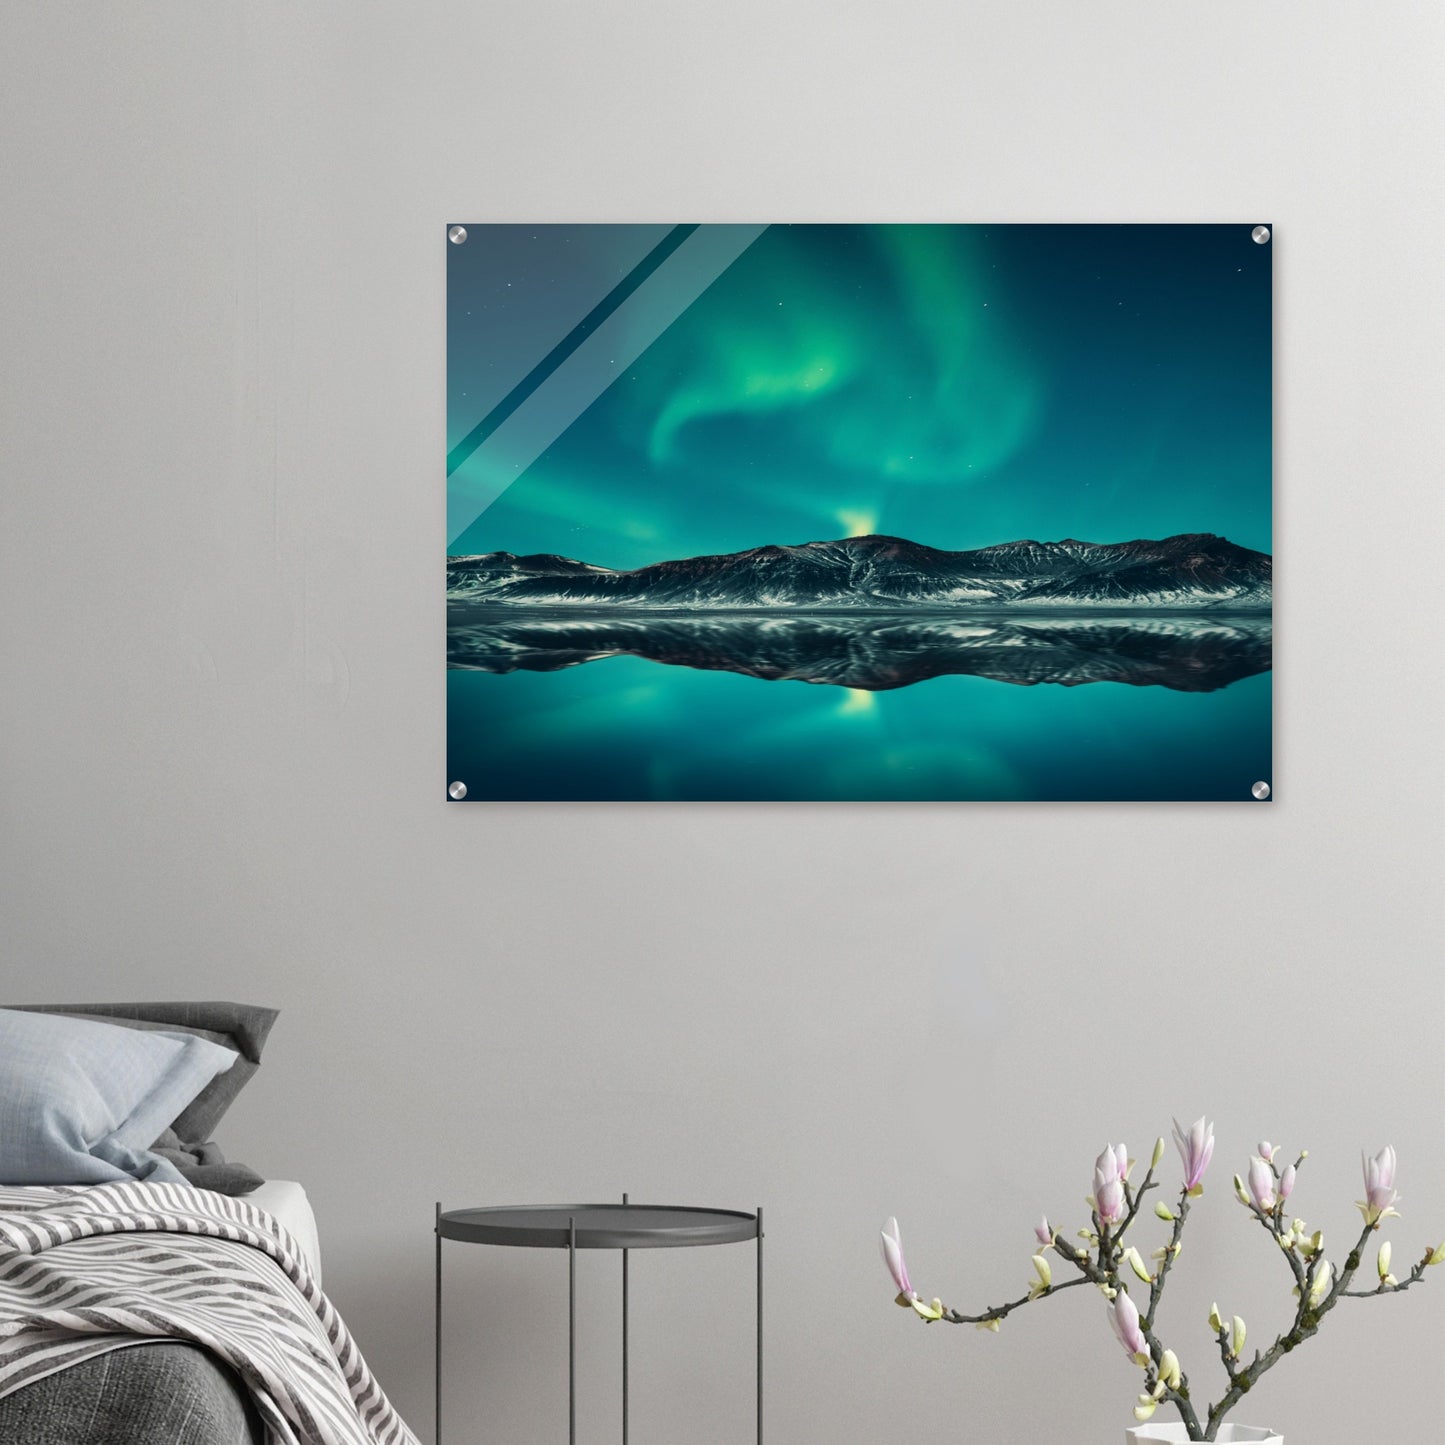 Unique Aurora Borealis Acrylic Prints - Multi Size Personalized Northern Light View - Modern Wall Art - Perfect Aurora Lovers Gift 4